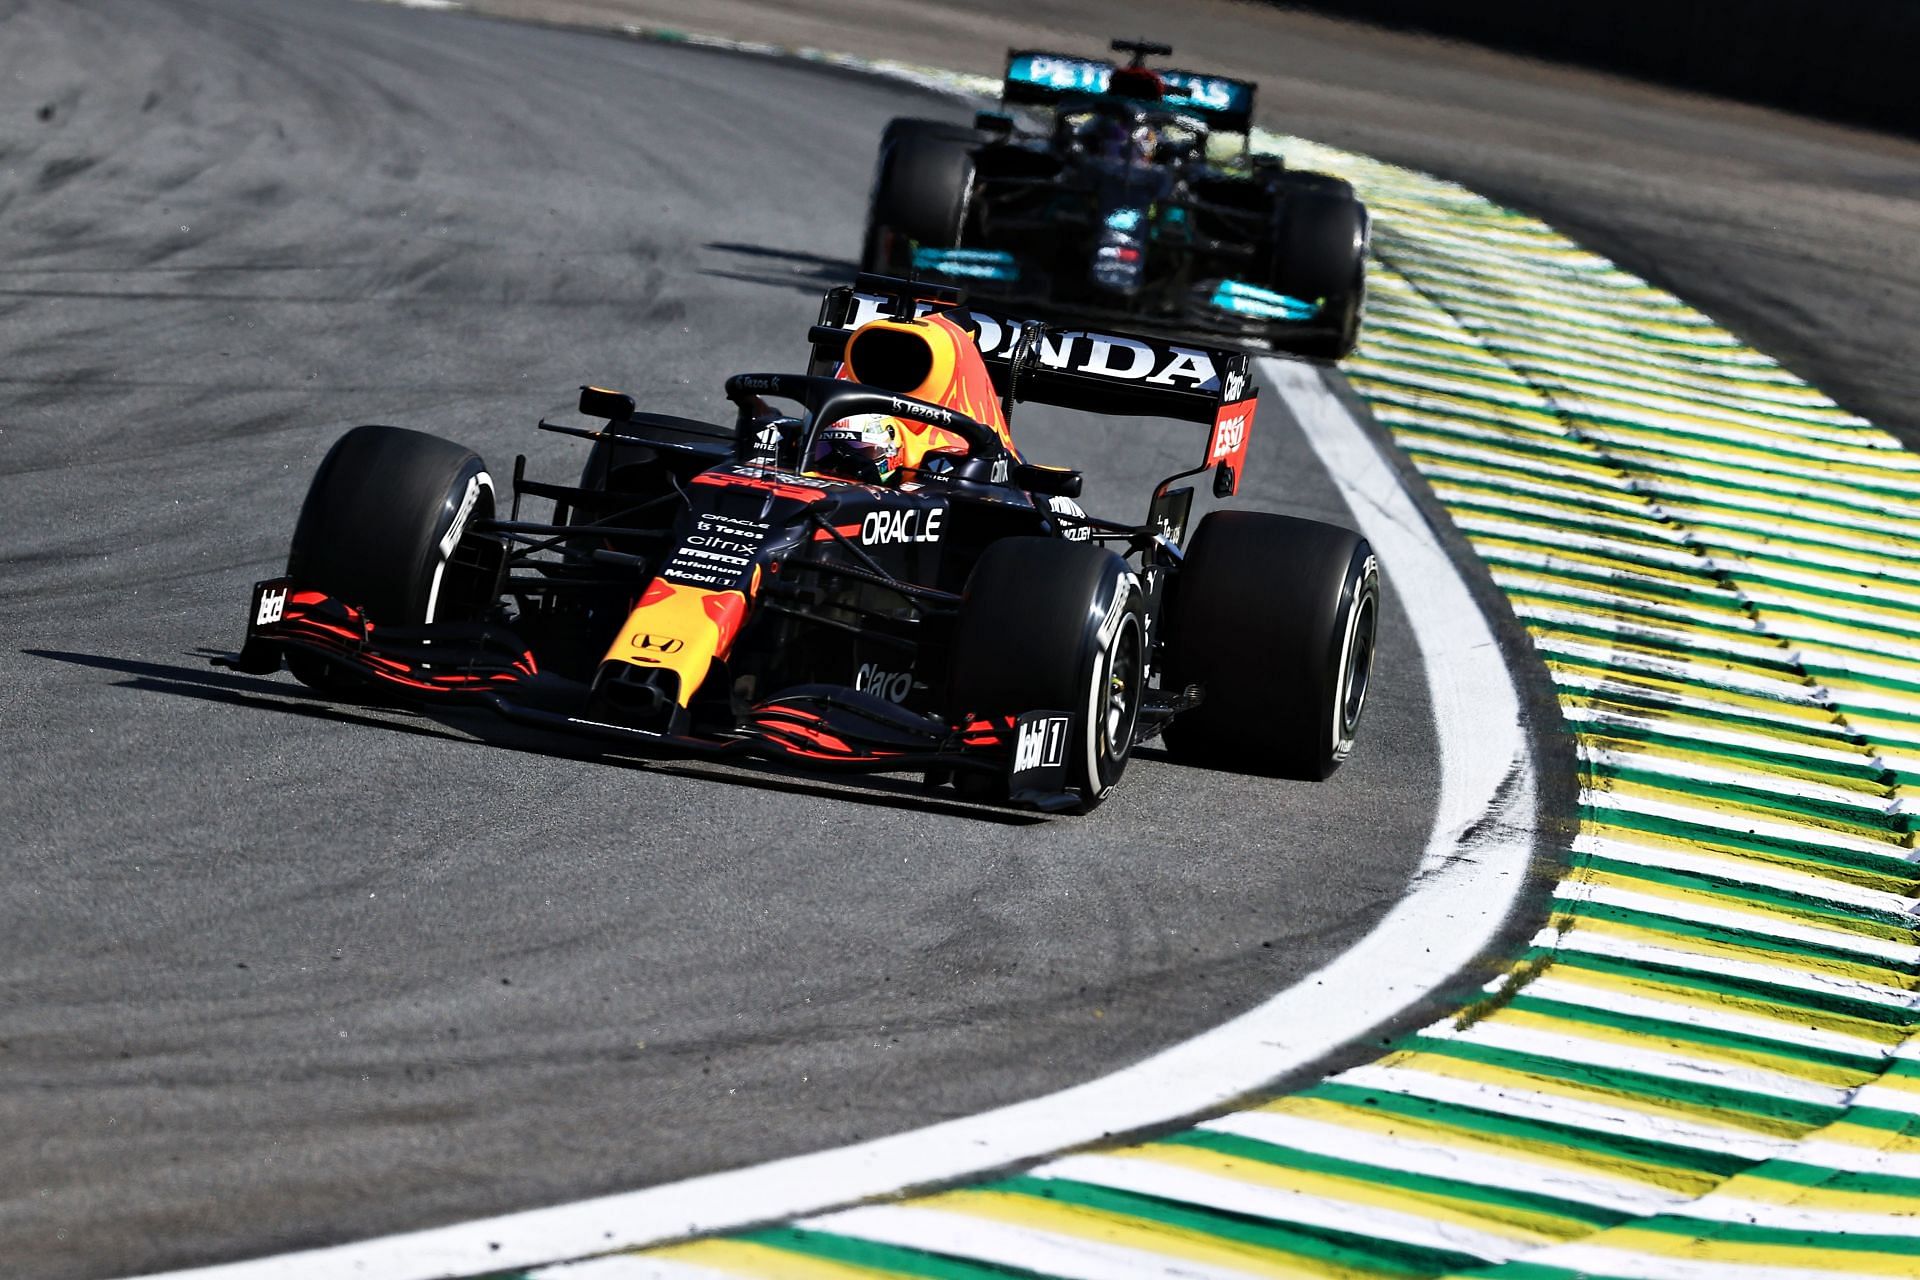 F1 Grand Prix of Brazil - Max and Lewis